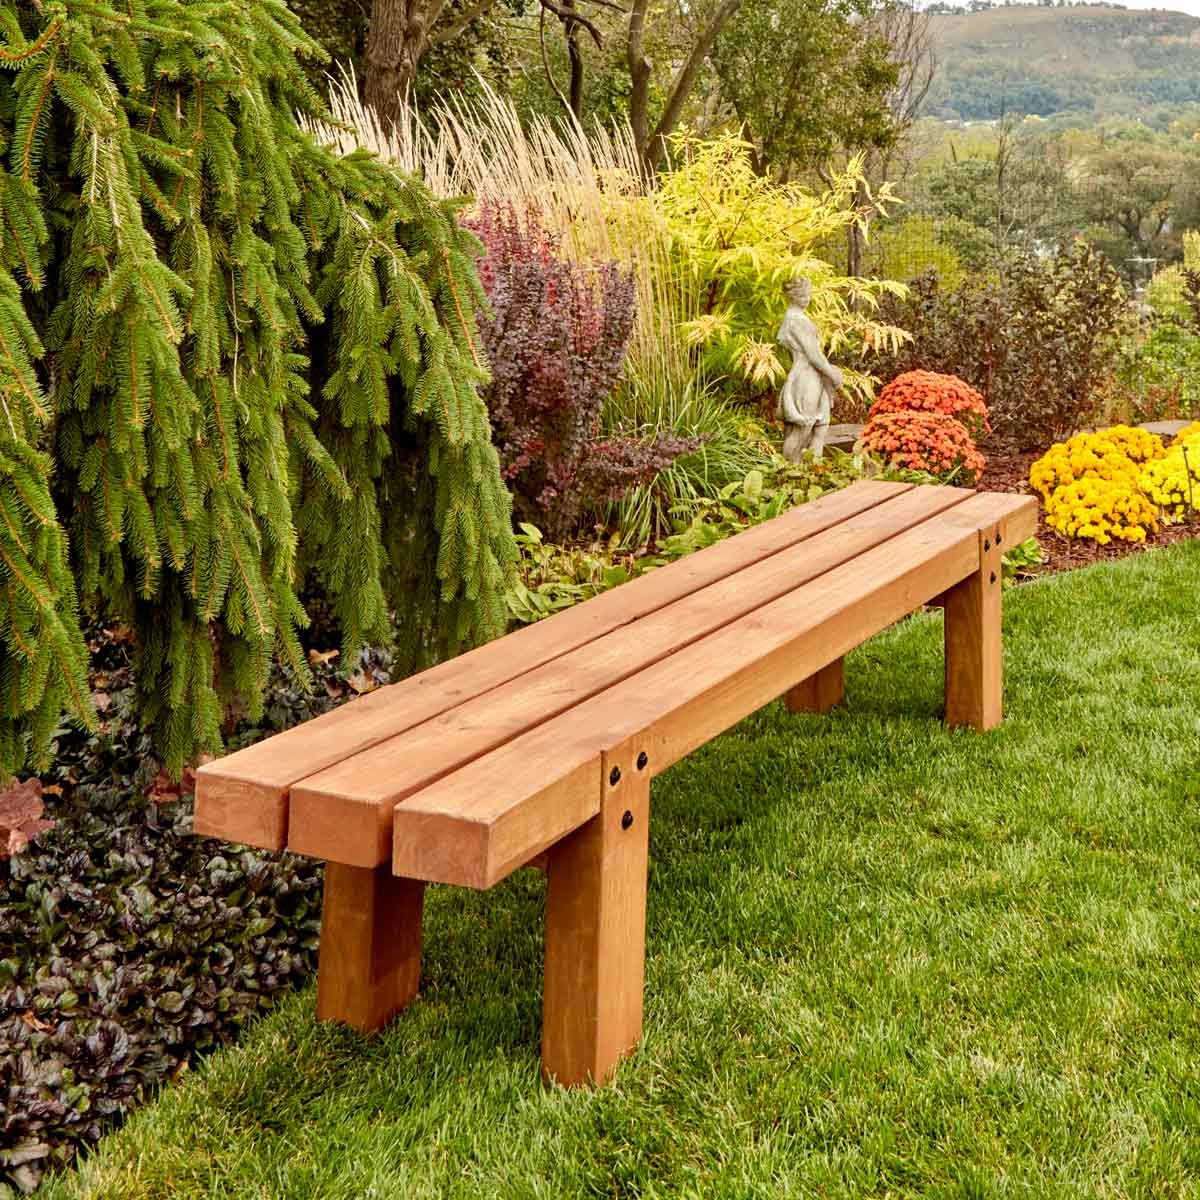 How To Build a Simple Timber Outdoor Bench